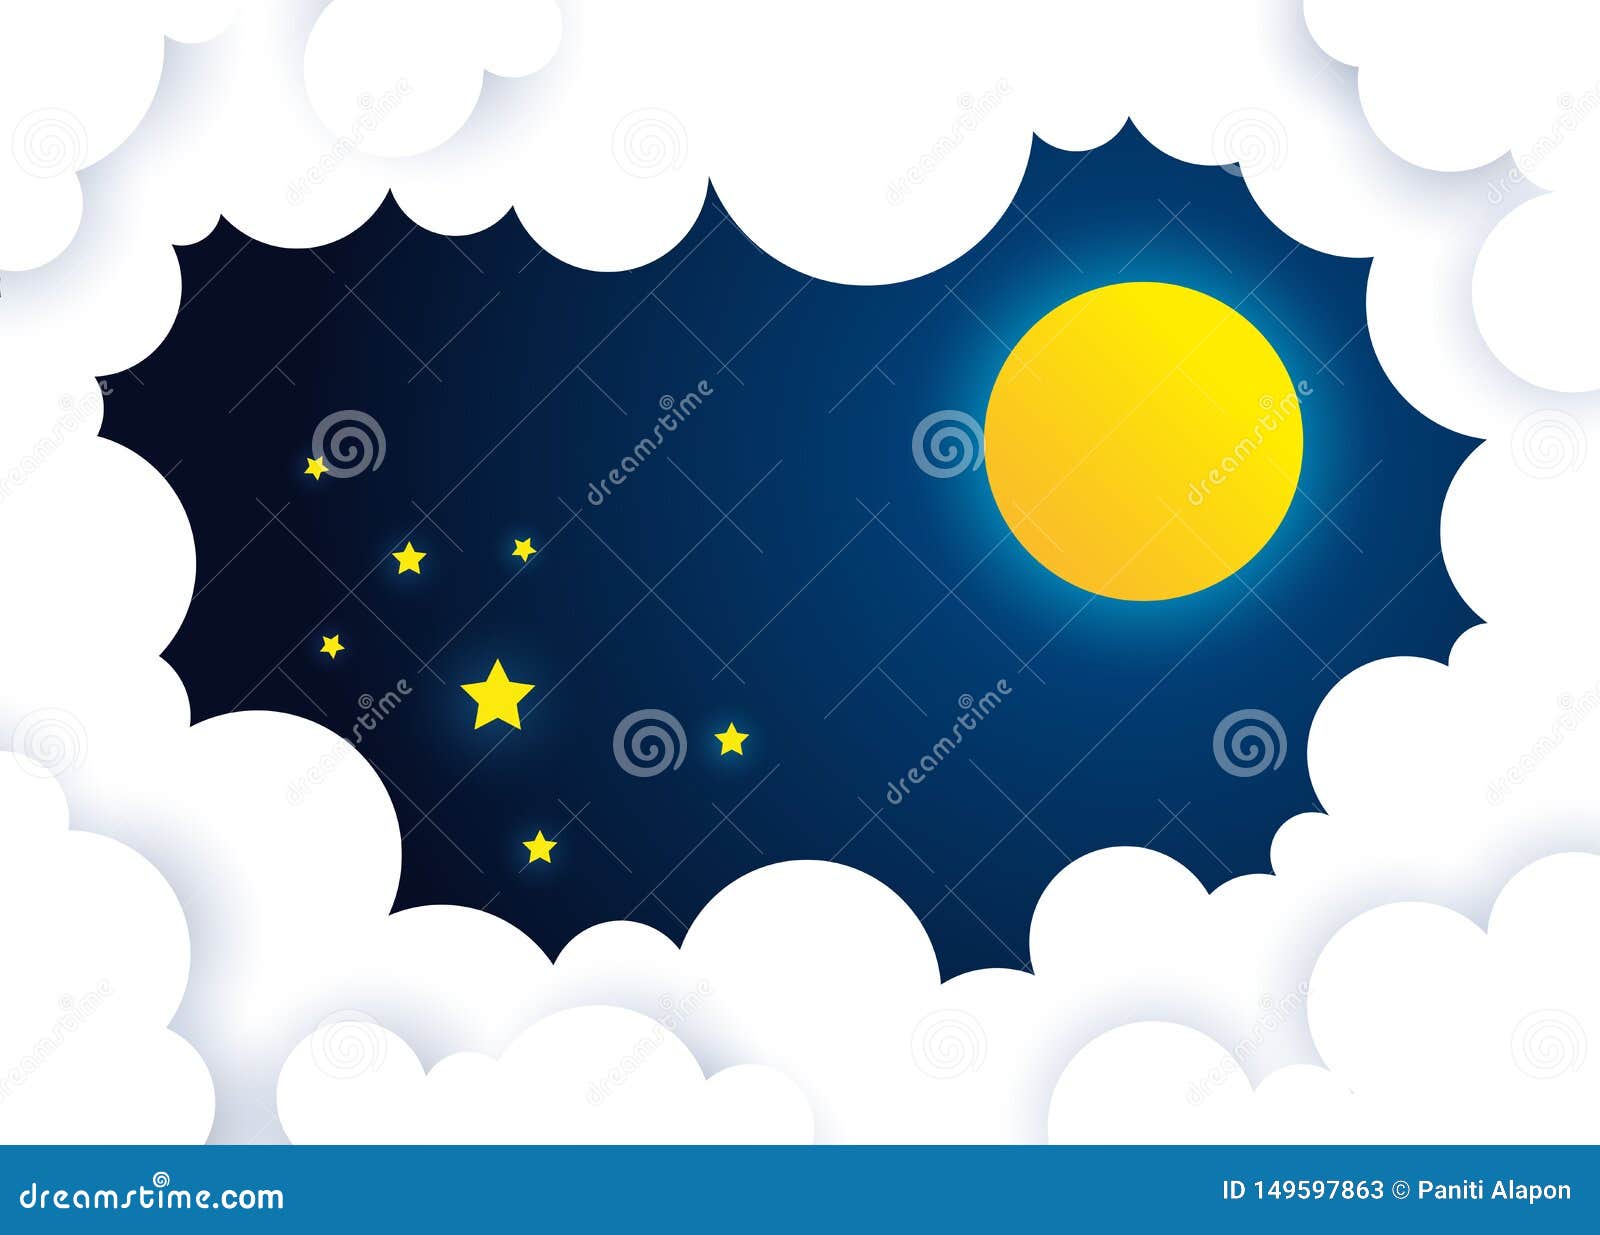 moon and stars in midnight .cloud at nighttime